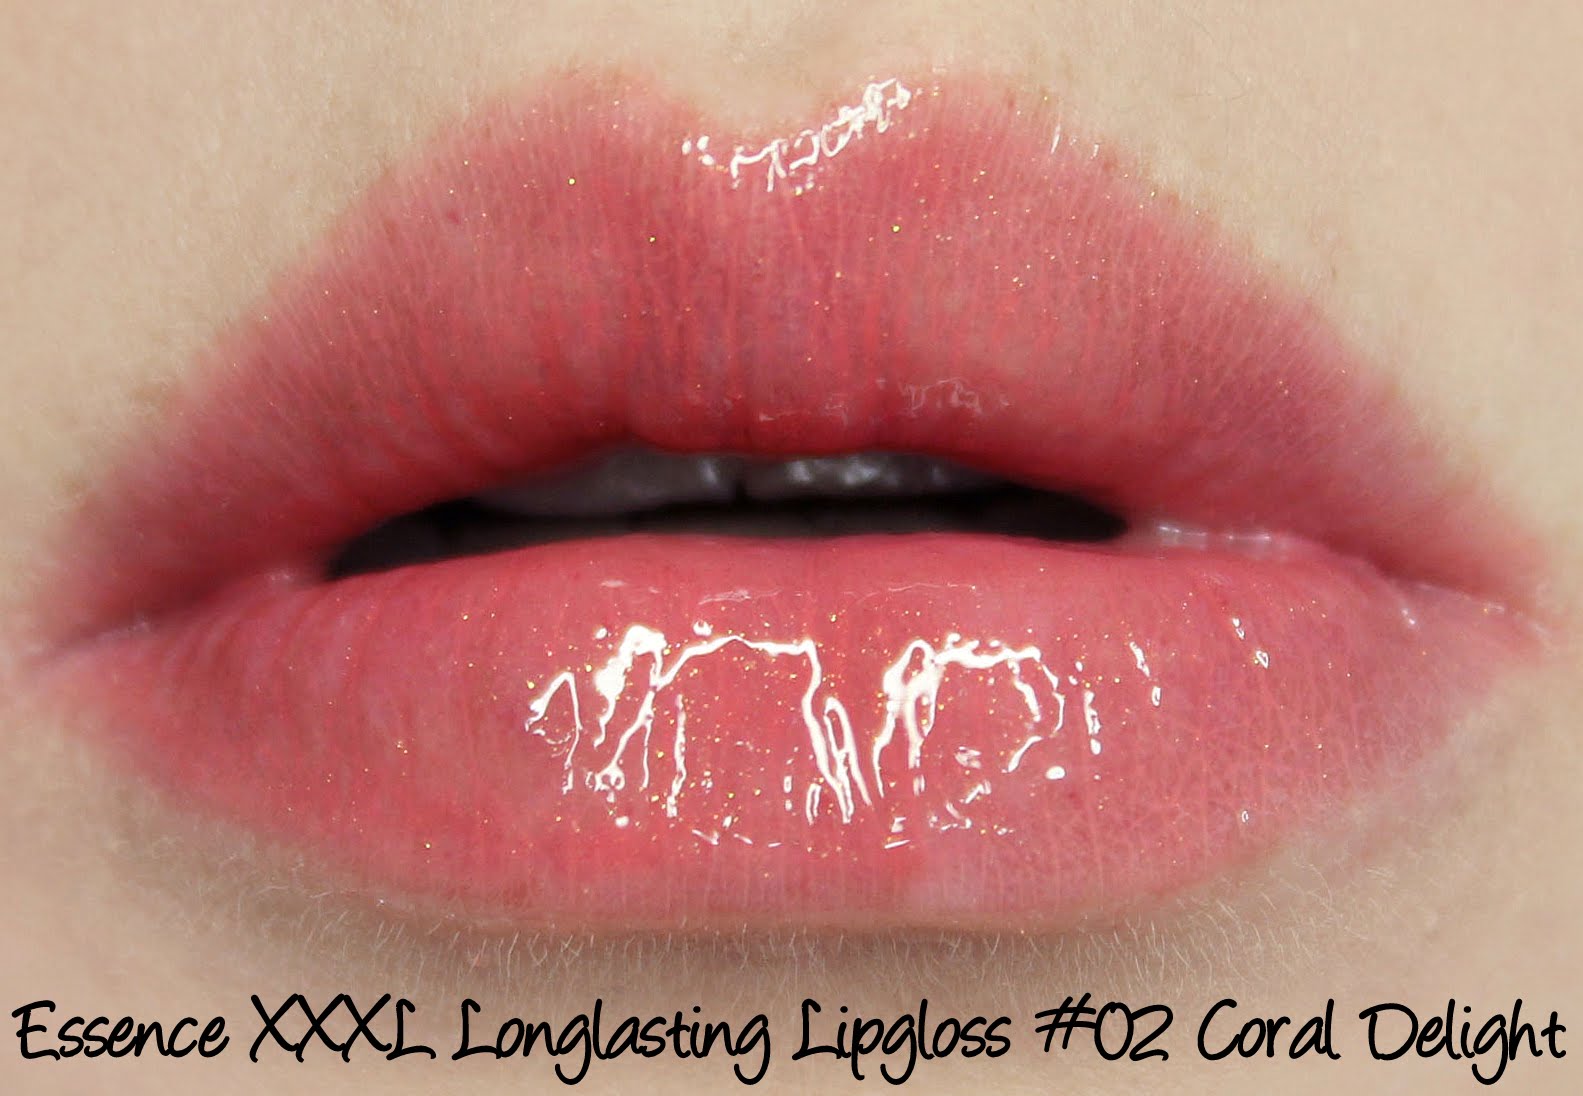 Essence XXXL Longlasting lipgloss #02 Coral Delight swatch